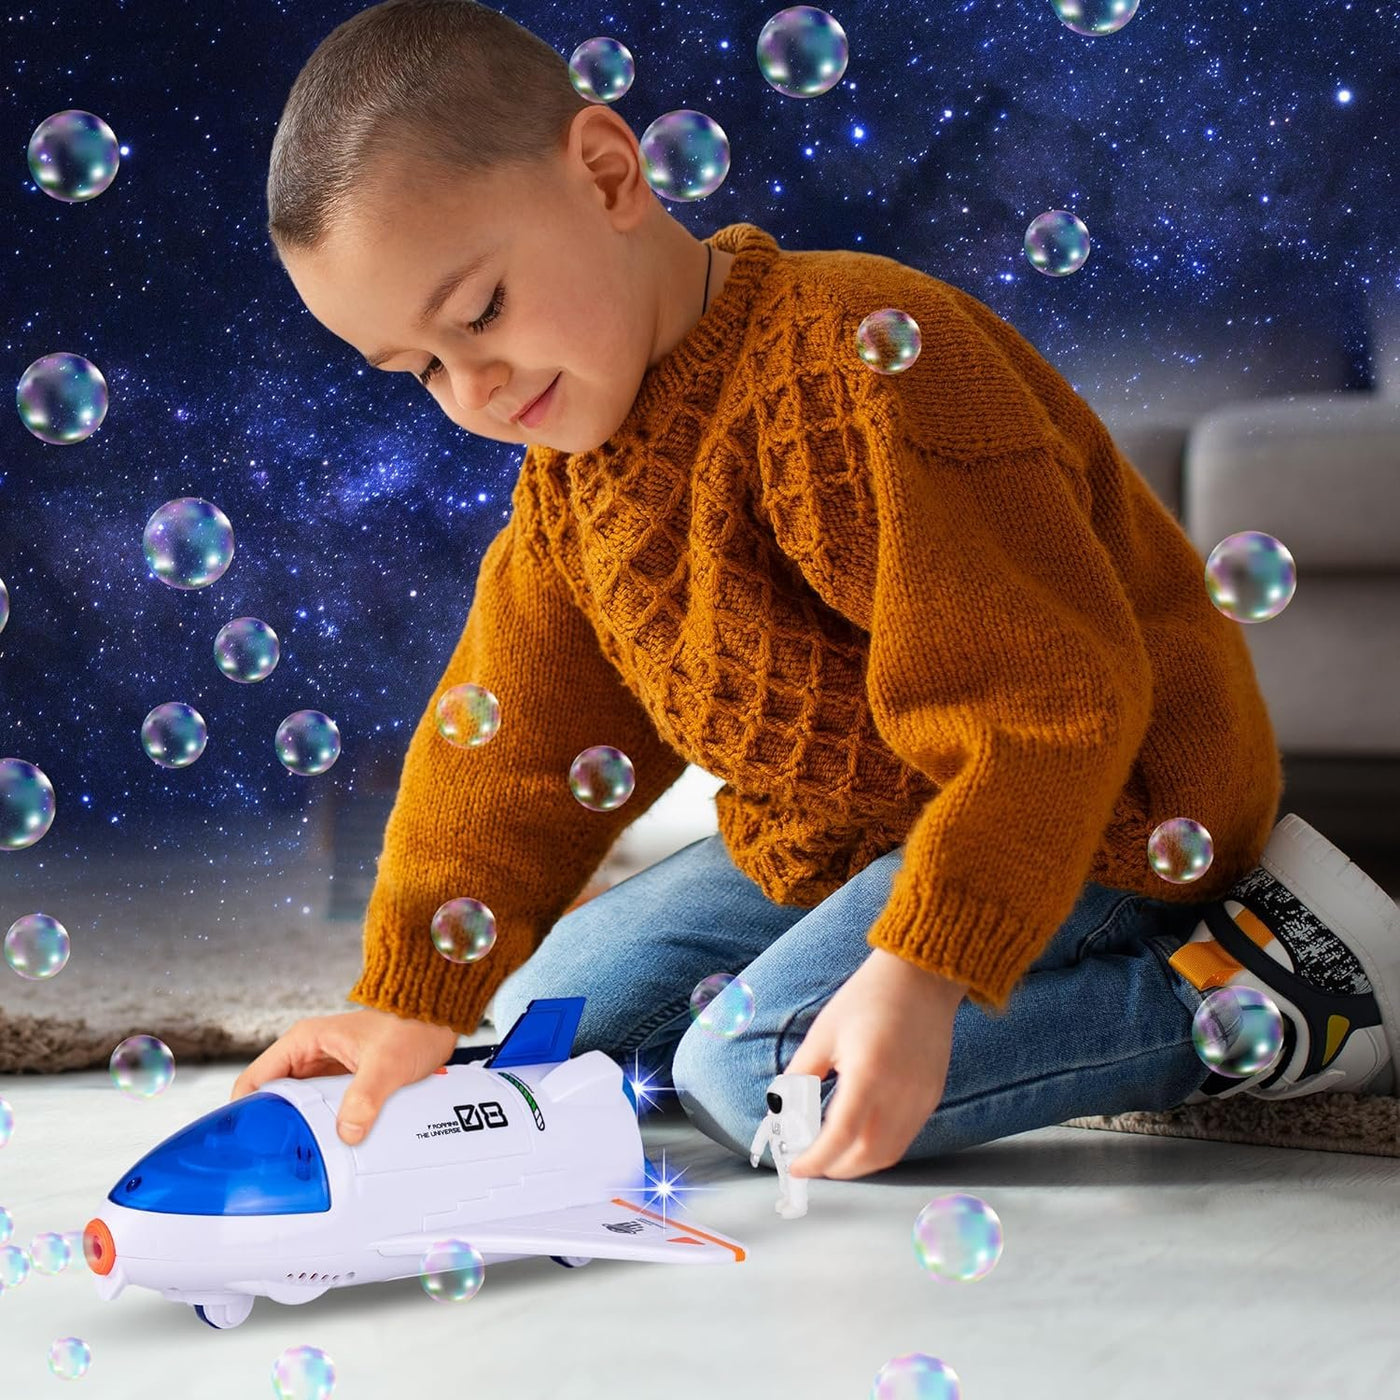 Spaceship Bubble Toy - Outer Space Bubble Machine with Bubble Solution and Astronaut Figurine - Bubble Makers for Kids Outside Play - Space Toys for Boys and Girls - Galaxy Party Supplies and Favors